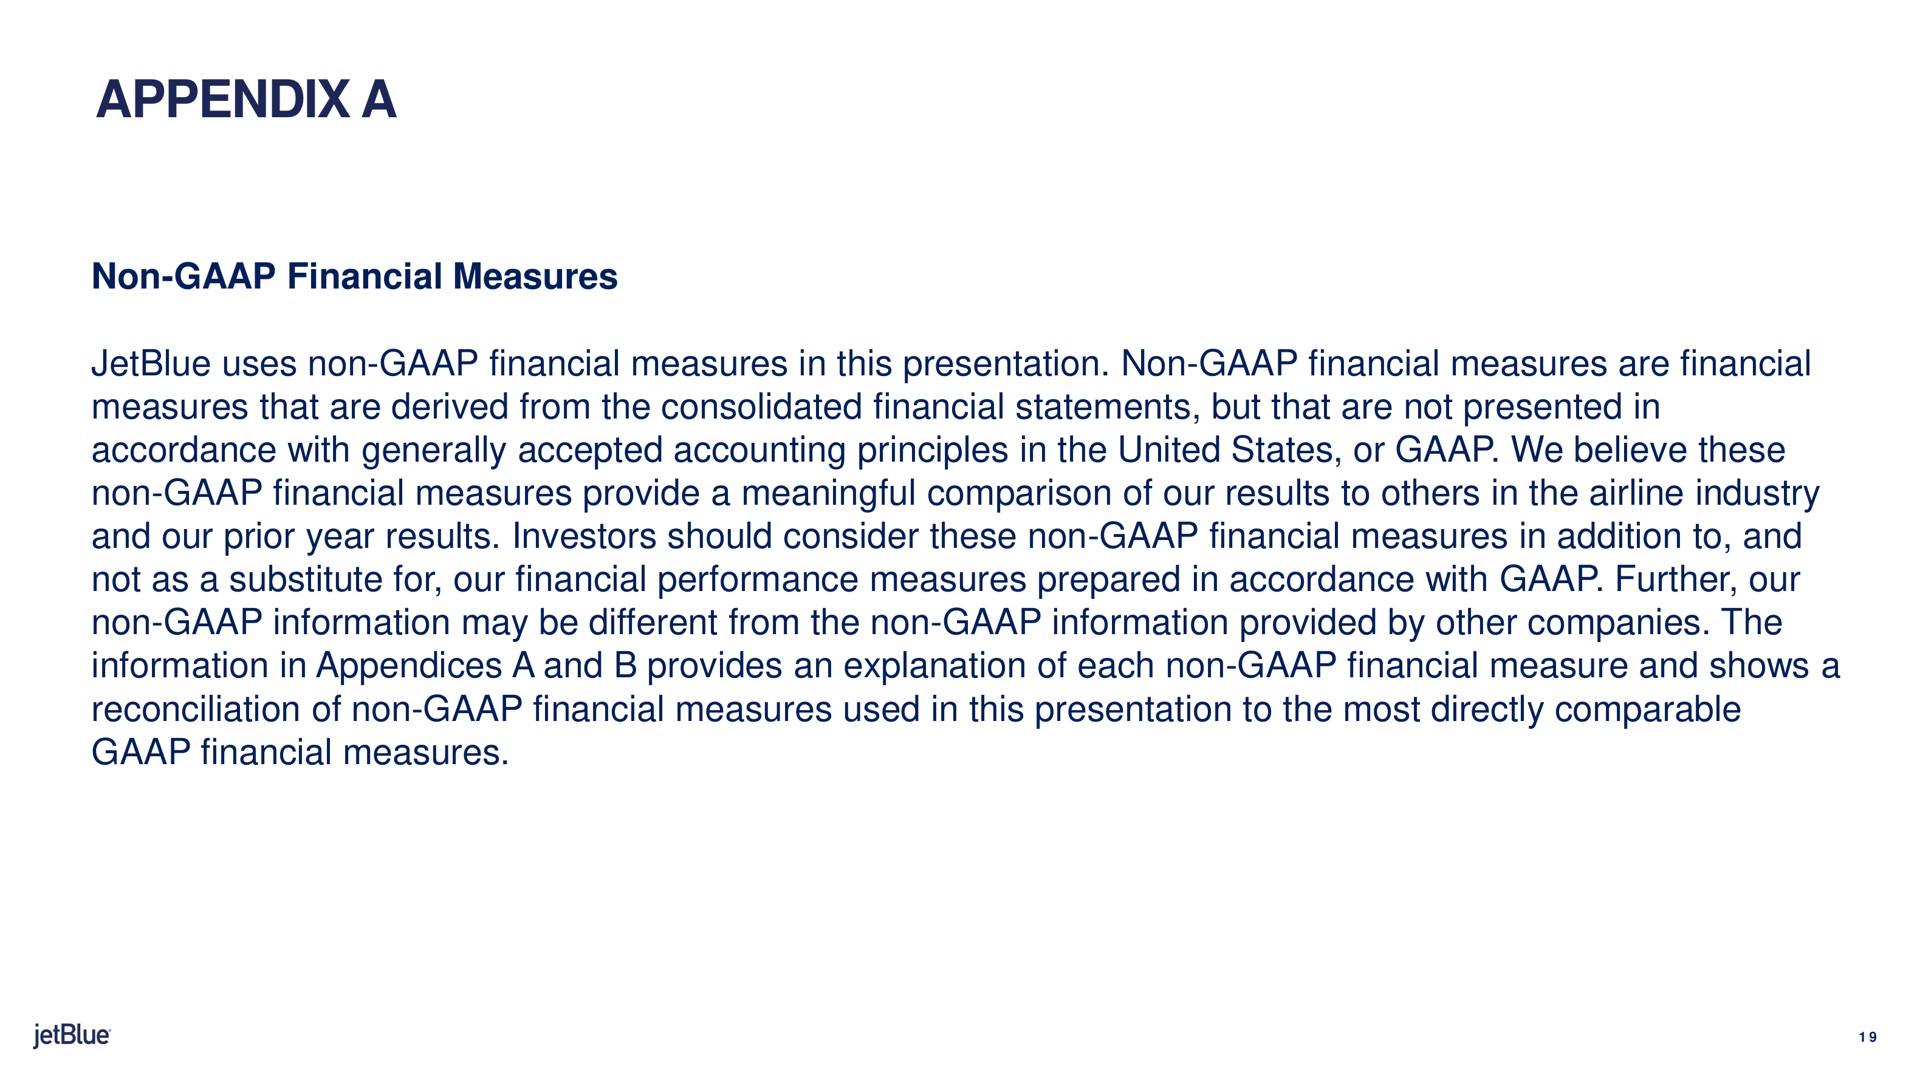 appendix a non financial measures uses non financial measures in this presentation non financial measures are financial measures that are derived from the consolidated financial statements but that are not presented in accordance with generally accepted accounting principles in the united states or we believe these non financial measures provide a meaningful comparison of our results to in the industry and our prior year results investors should consider these non financial measures in addition to and not as a substitute for our financial performance measures prepared in accordance with further our non information may be different from the non information provided by other companies the information in appendices a and provides an explanation of each non financial measure and shows a reconciliation of non financial measures used in this presentation to the most directly comparable financial measures | jetBlue